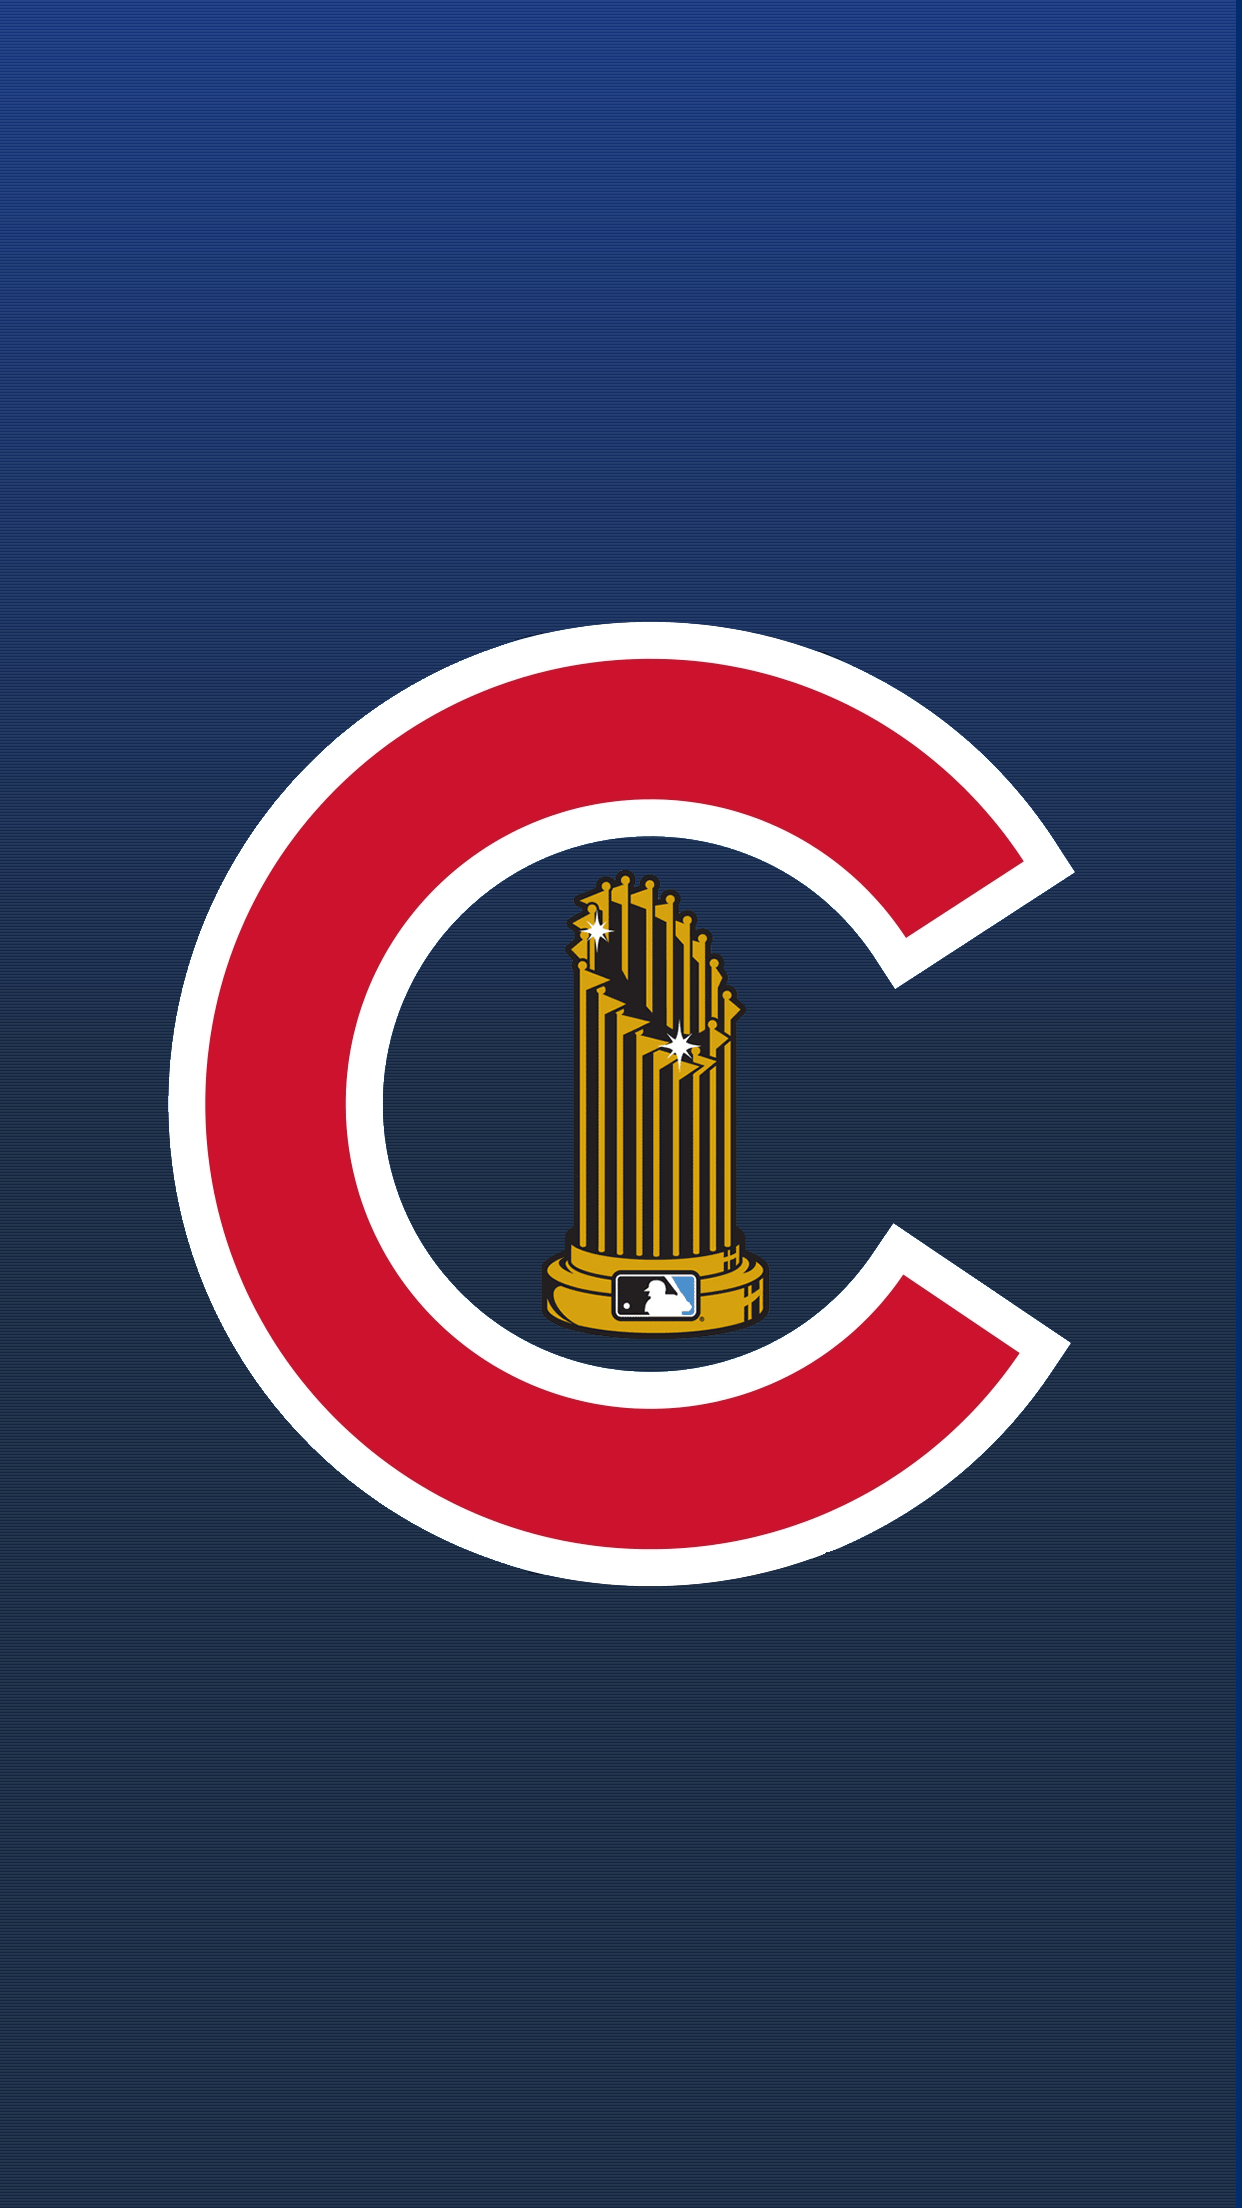 Someone asked for a iPhone Wallpaper of the C and trophy. Here you